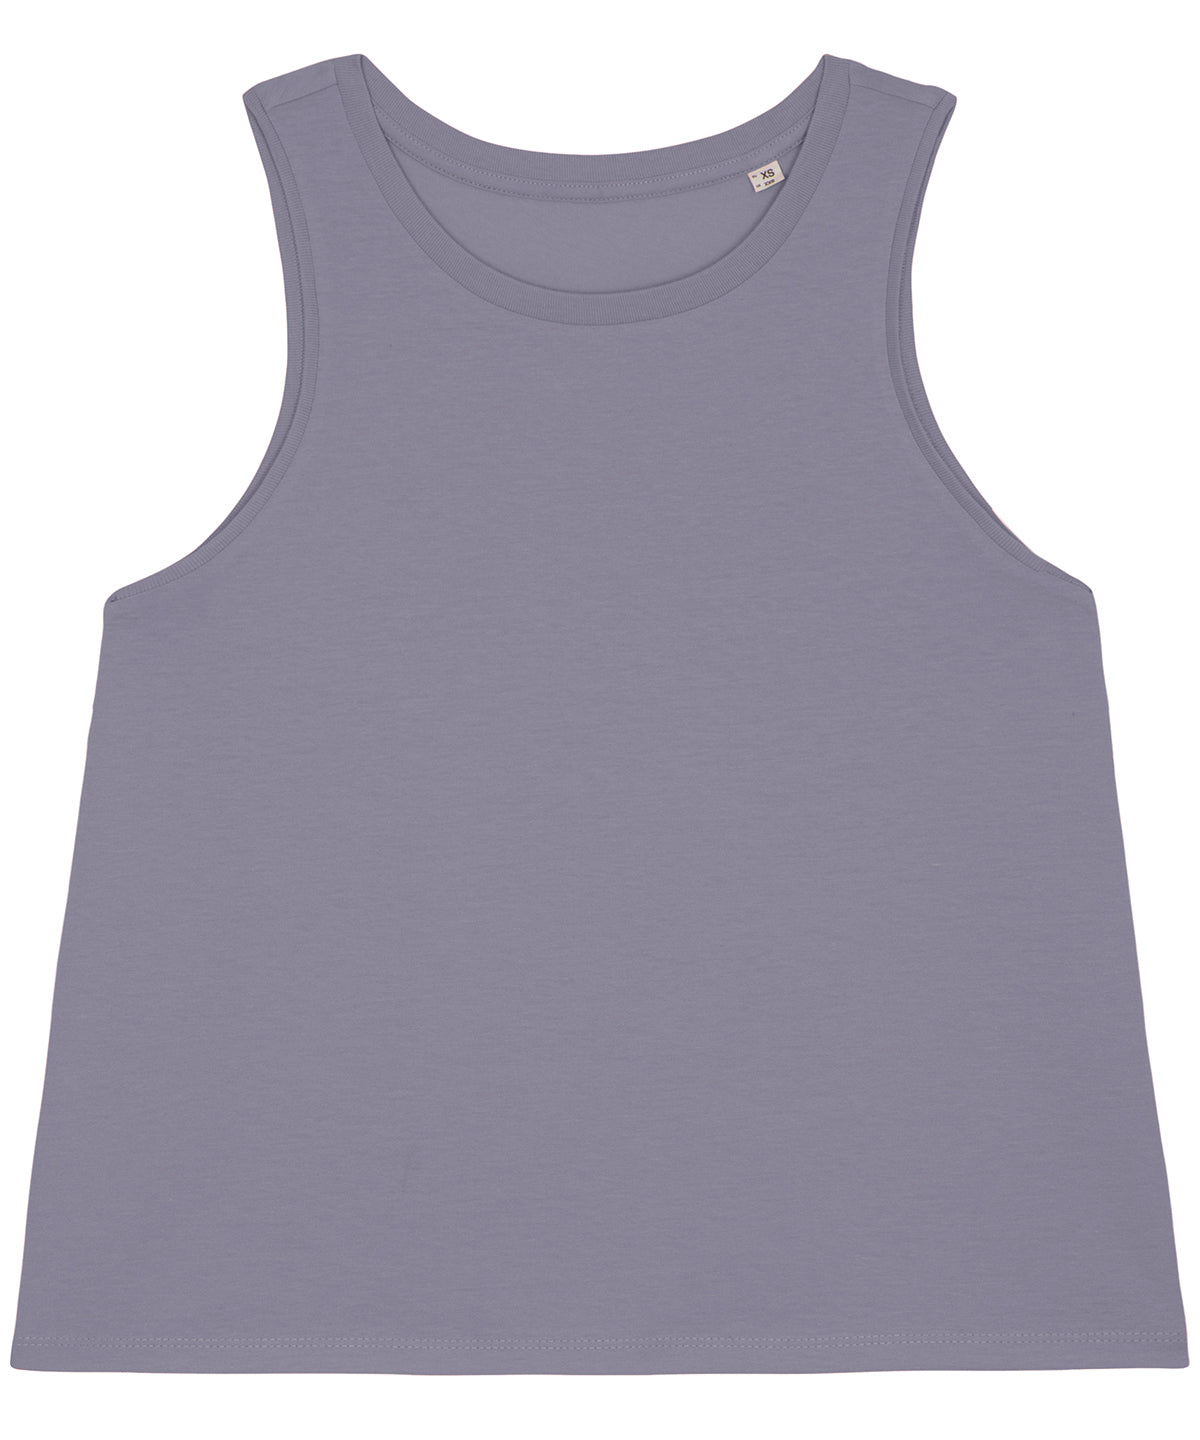 Lightweight Organic Relaxed Fit Vest Top (Womens)